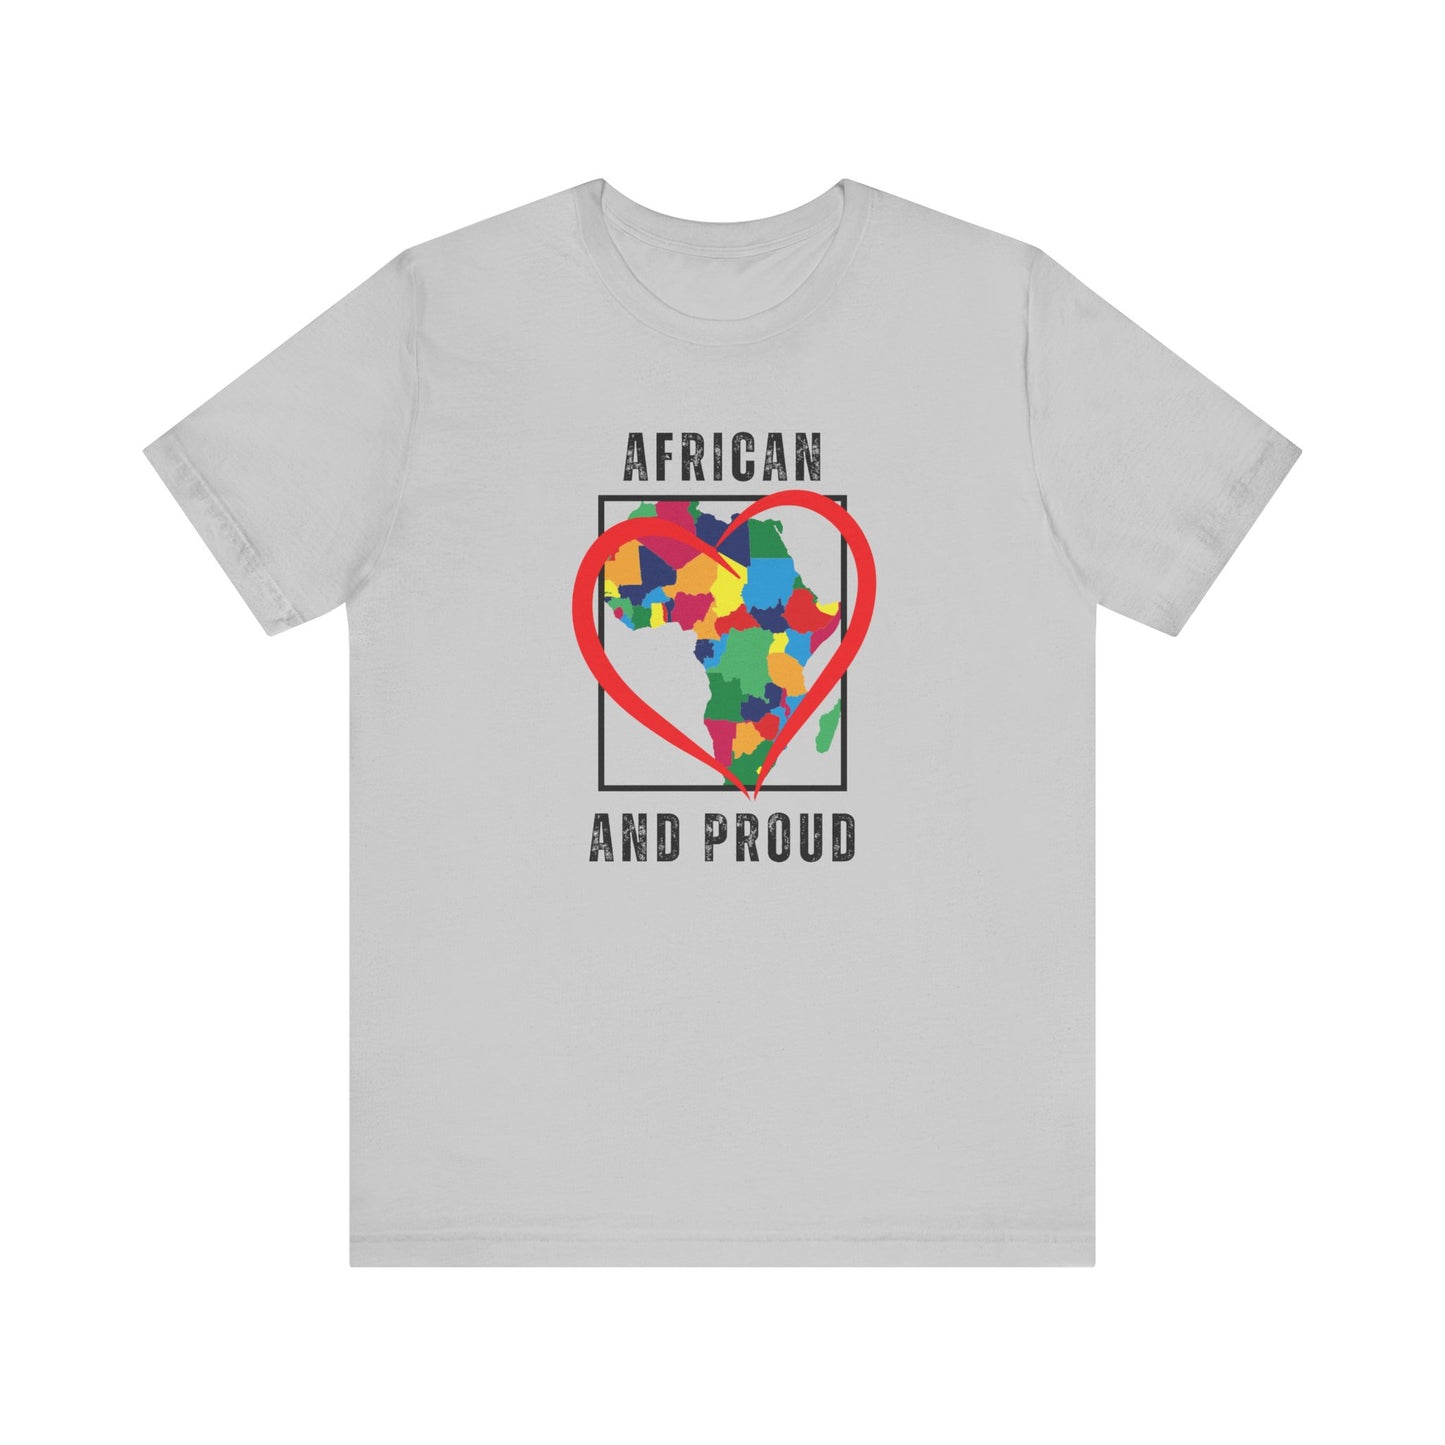 African and Proud shirt